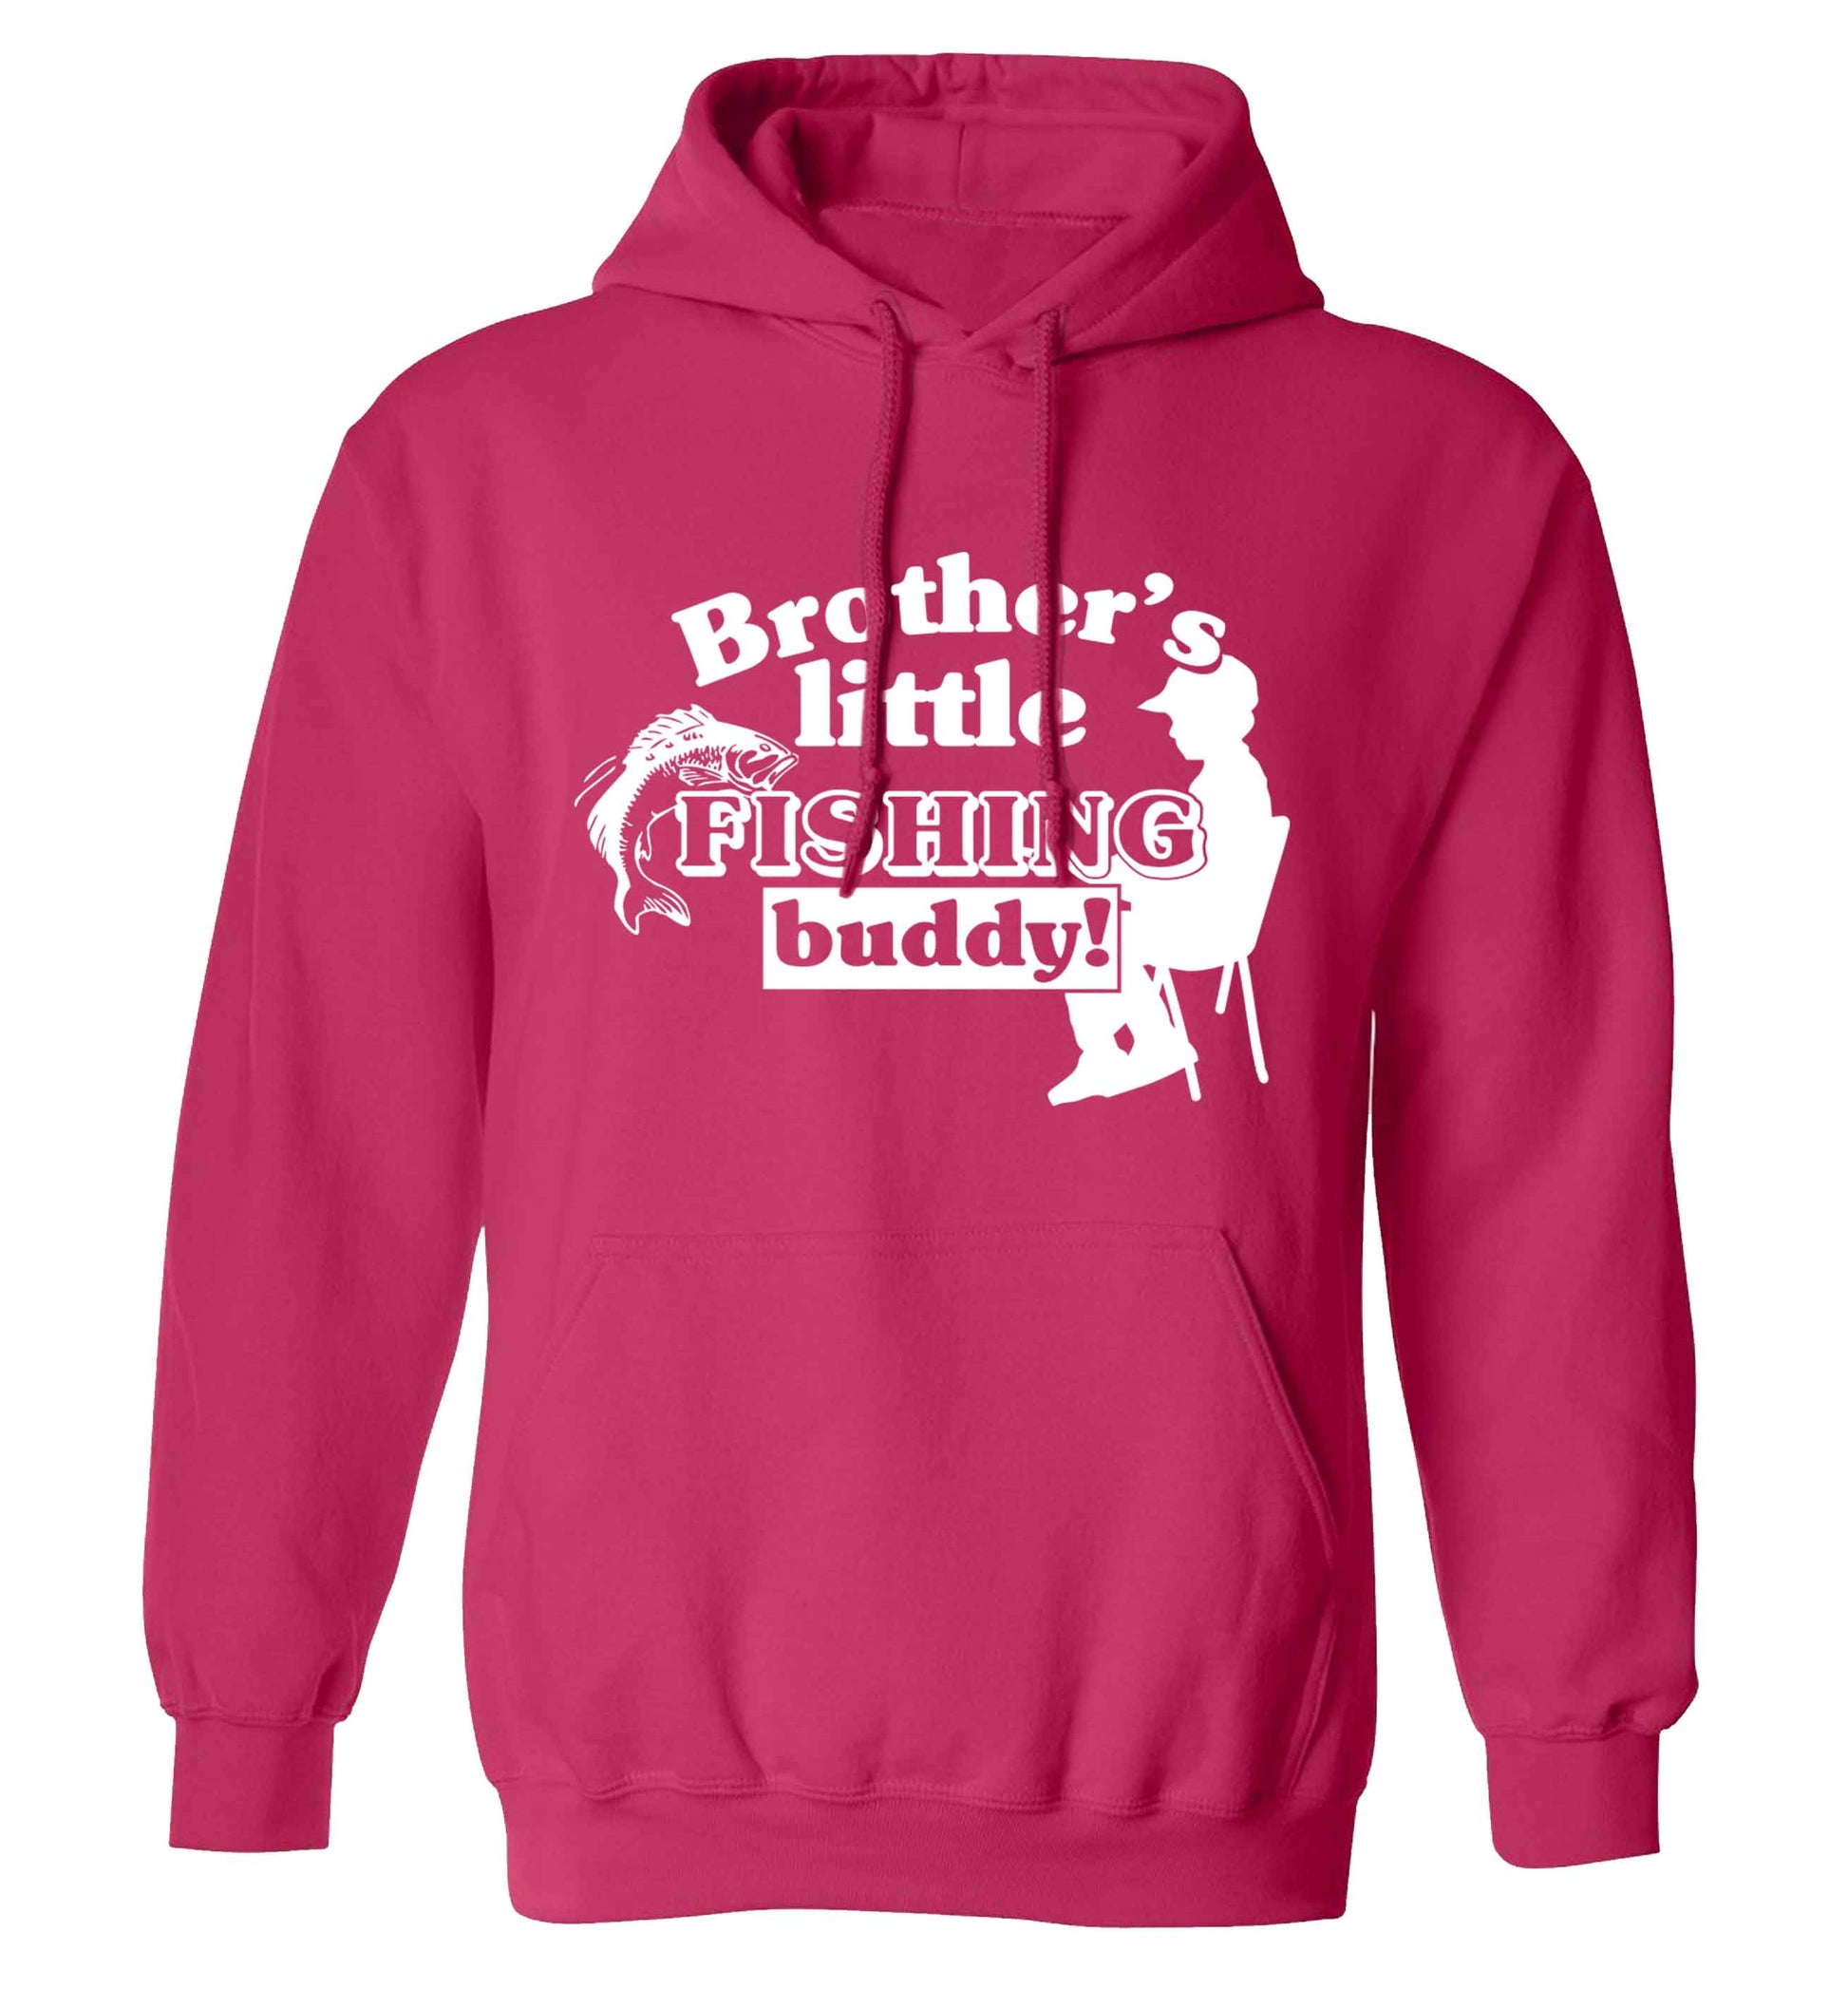 Brother's little fishing buddy adults unisex pink hoodie 2XL